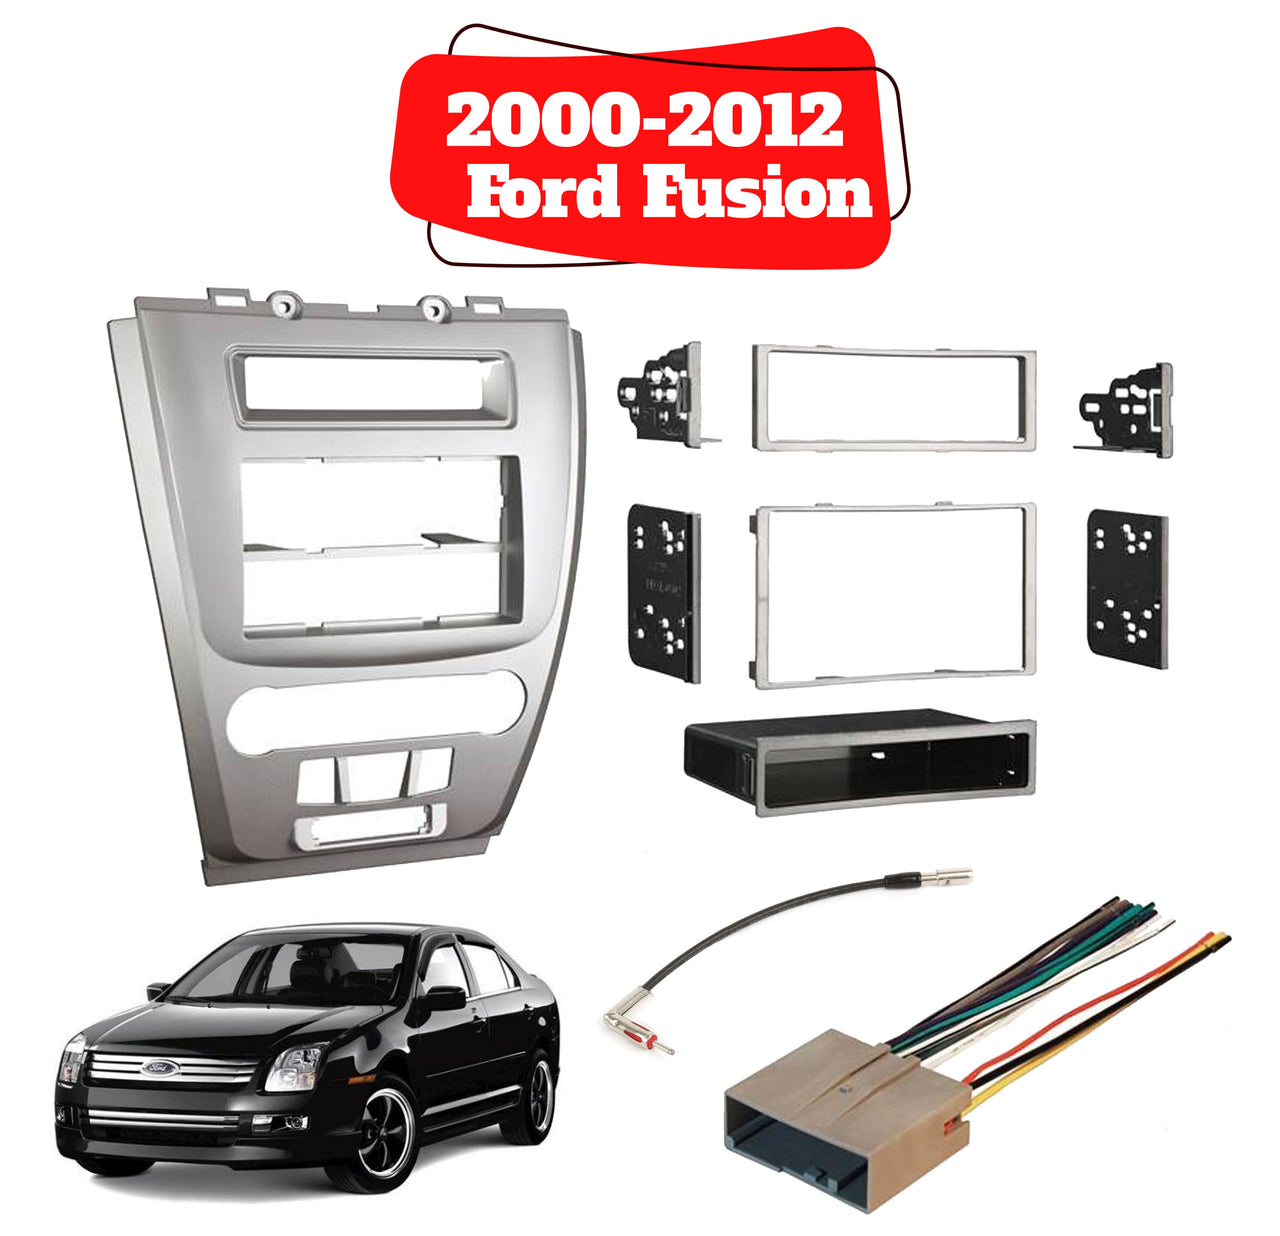 Car Radio Stereo Din 2Din Silver Dash Kit Harness Antenna for 2010-12 Ford Fusion Mercury